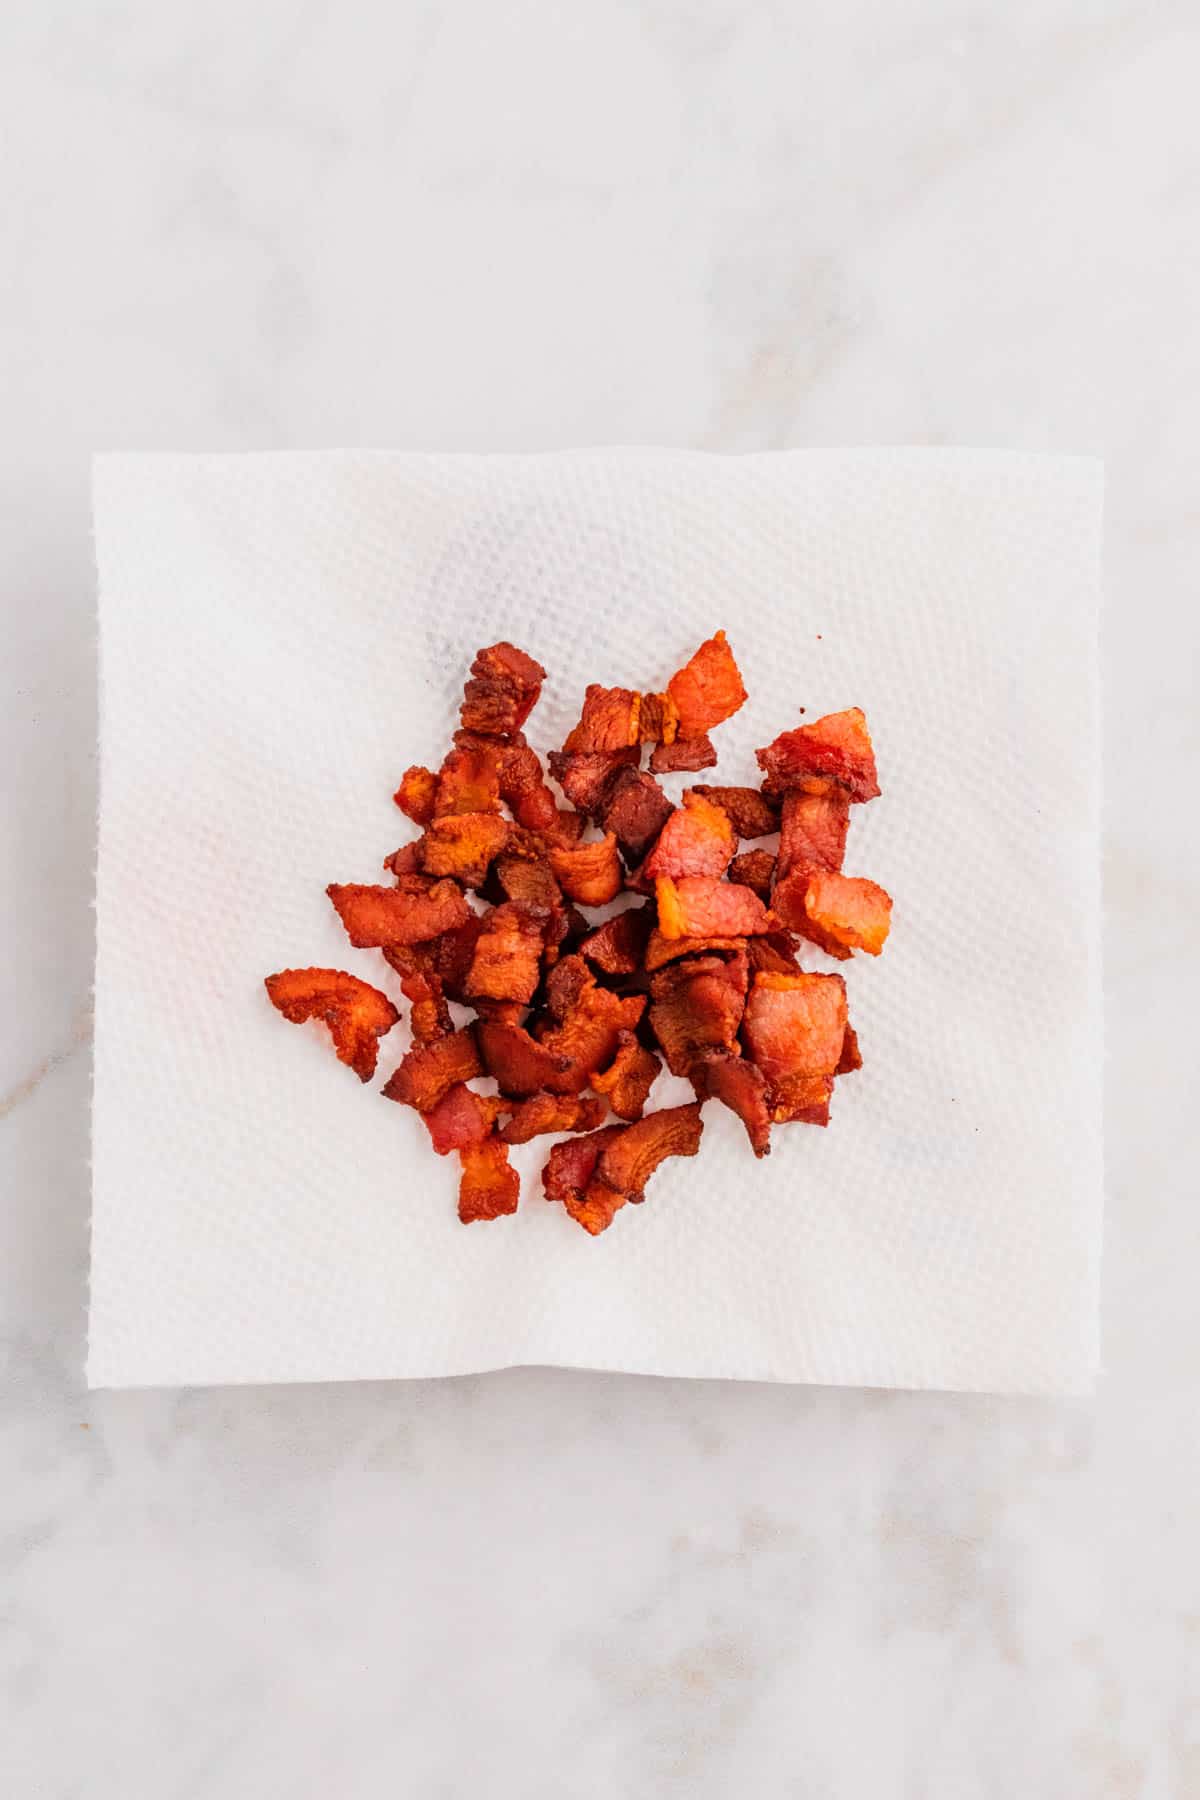 cooked bacon pieces on a paper towel lined plate